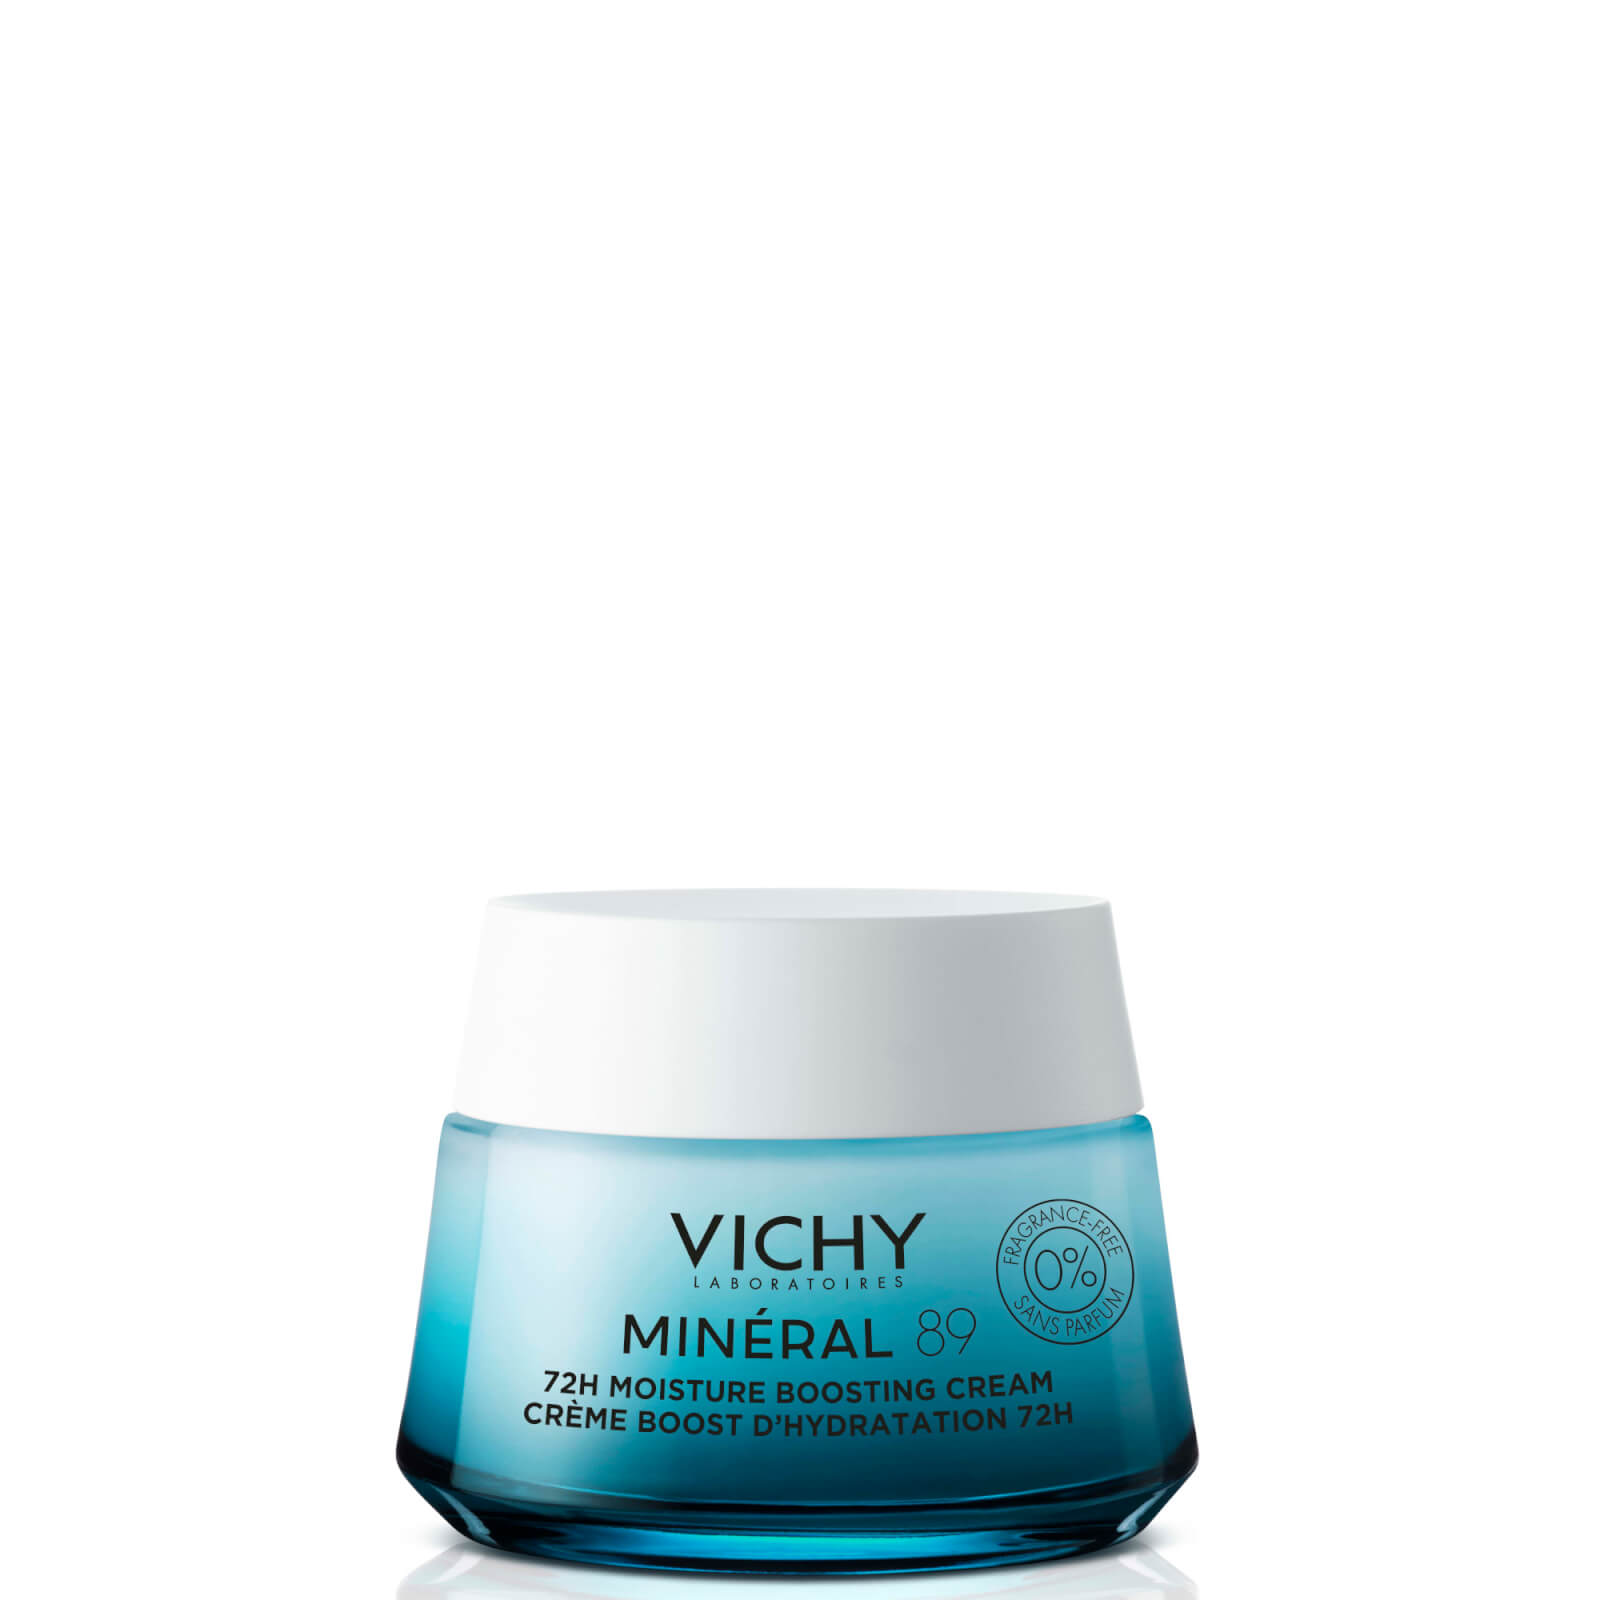 Vichy Mineral 89 72Hr Hyaluronic Acid and Squalane Moisture Boosting Cream 50ml